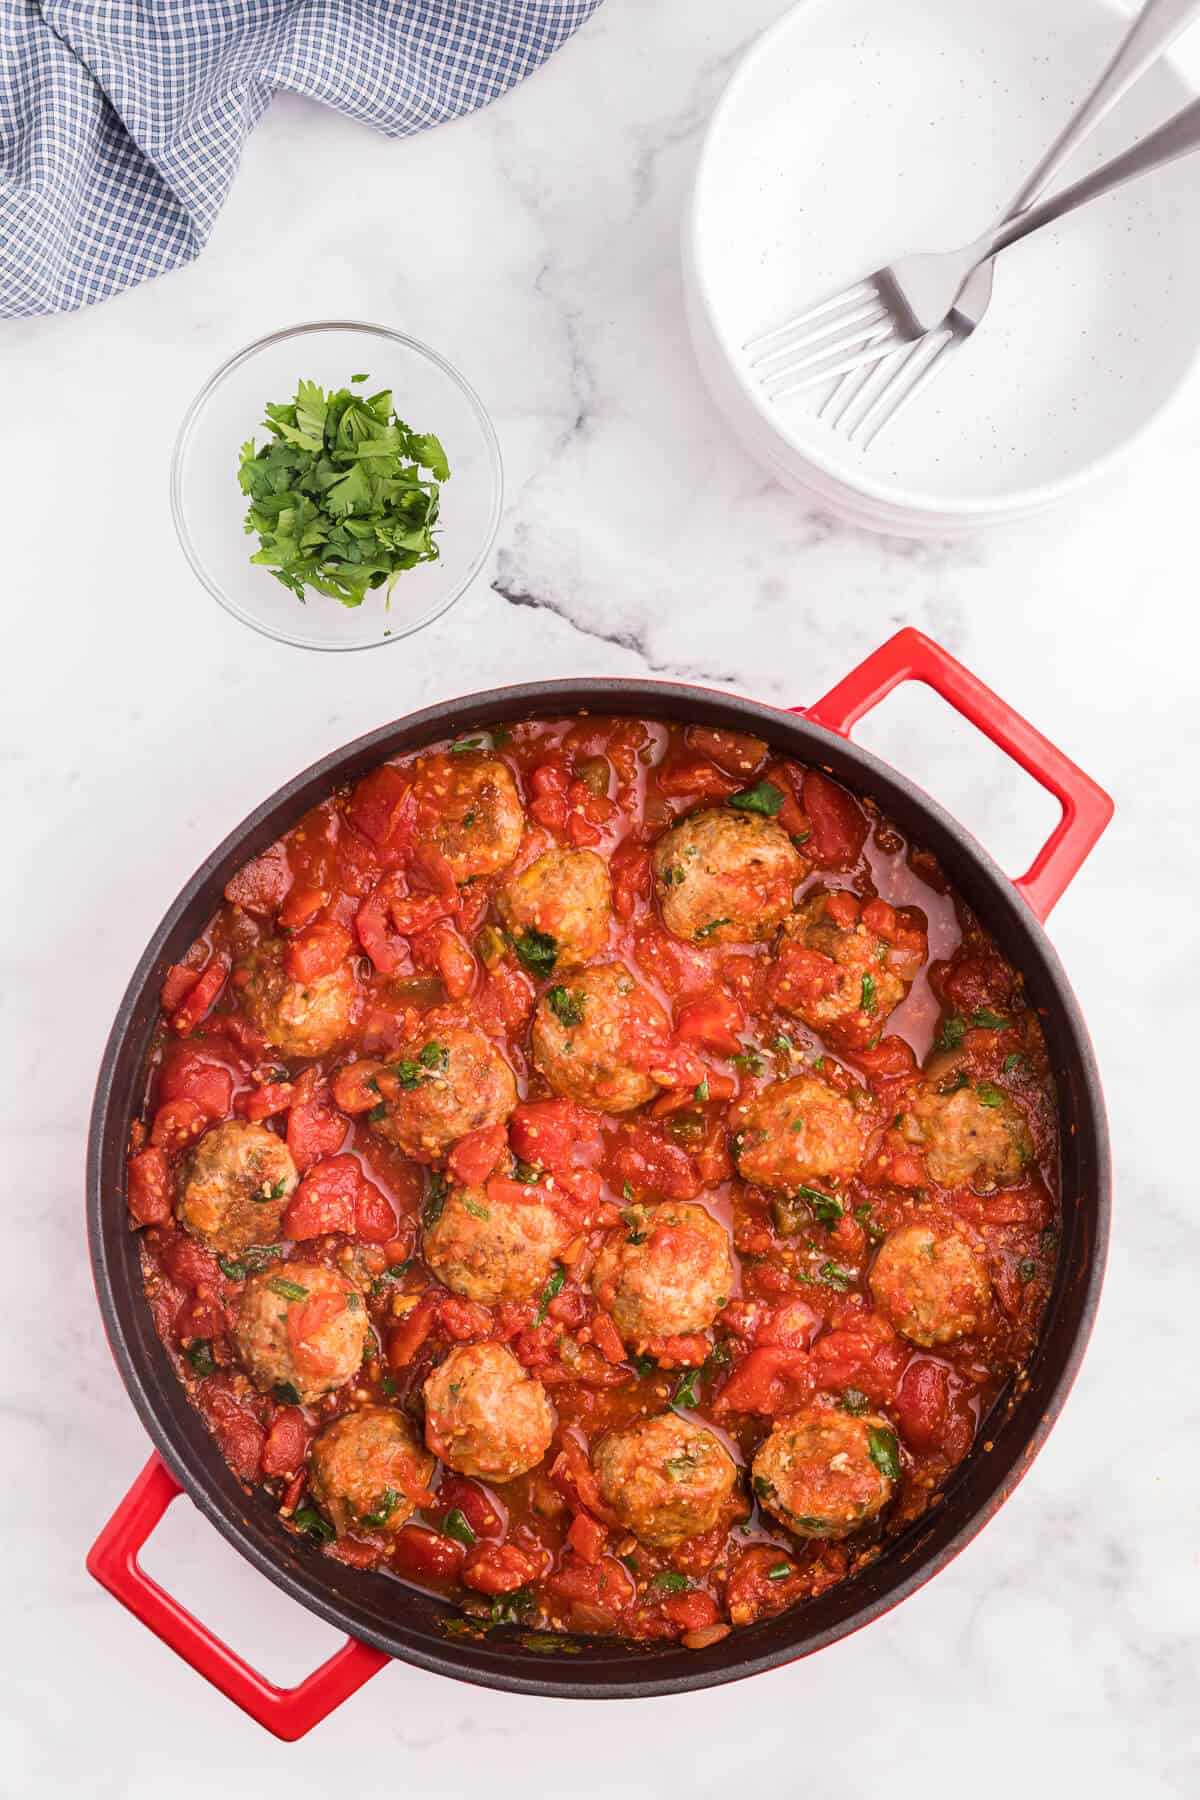 Mexican Meatballs - A fun new spin on the traditional meatball. Serve as an appetizer or add them to a pasta dish!